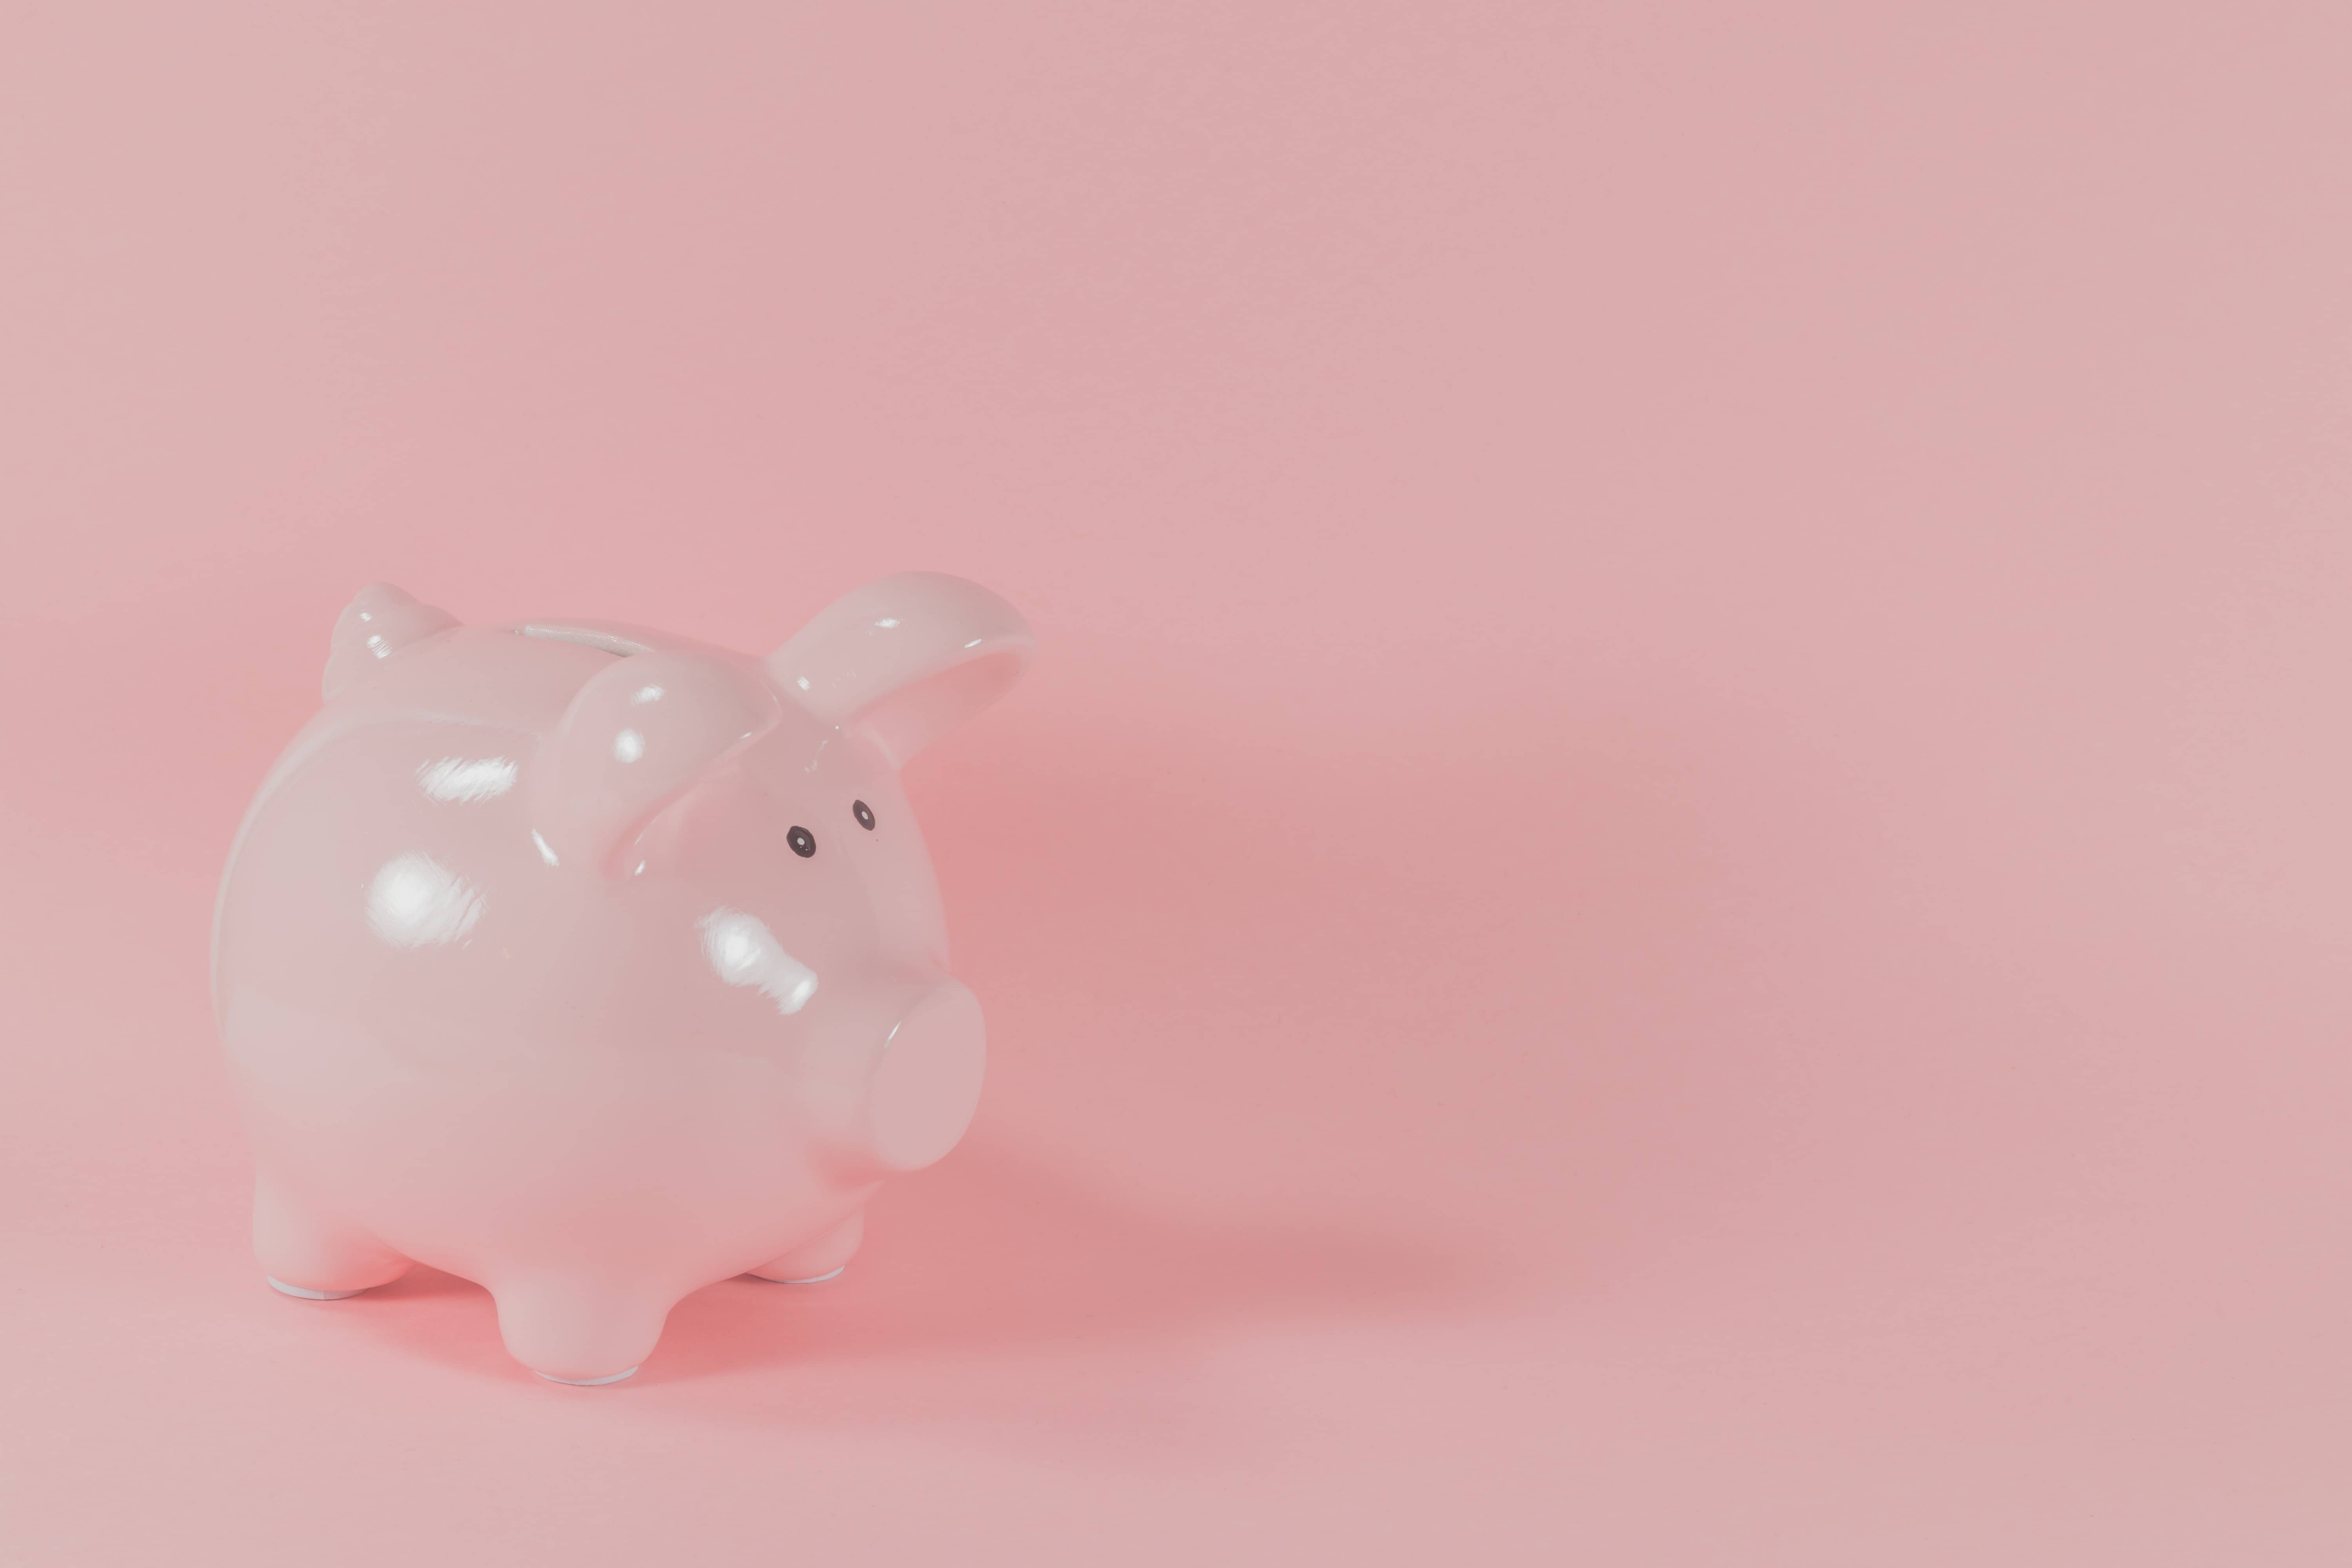 avoid student loan debt and save money in piggy bank